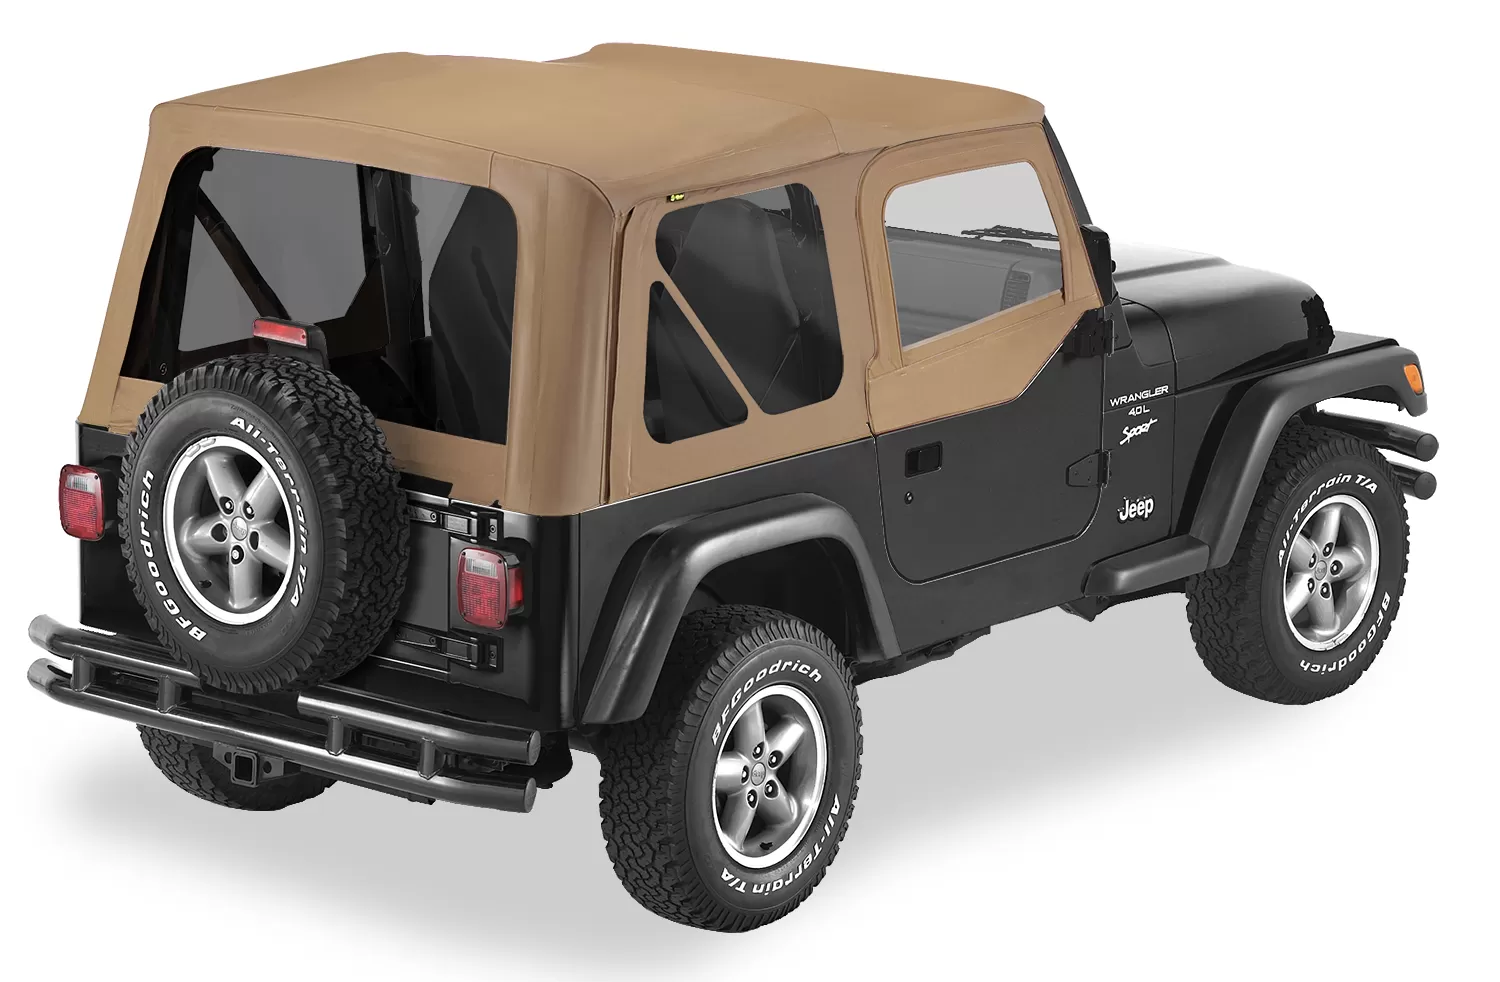 Bestop Spice Sailcloth Replace-a-Top Tinted Windows w/ Upper Door Skins Jeep Wrangler 1997-2002 - 79124-37